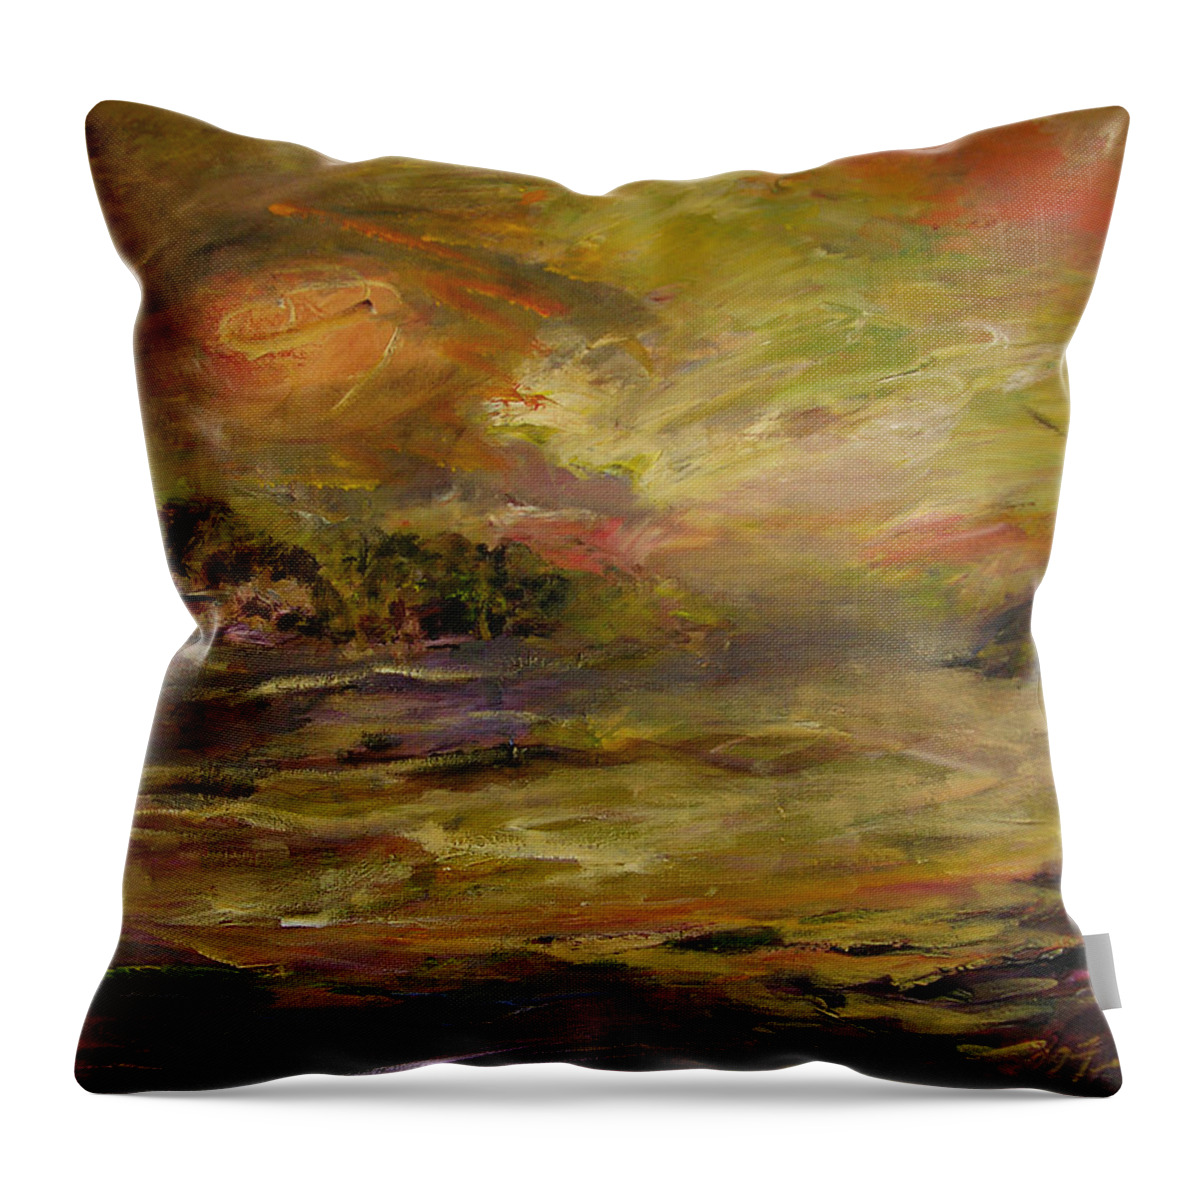 Landscapes Throw Pillow featuring the painting Tropics by Julianne Felton